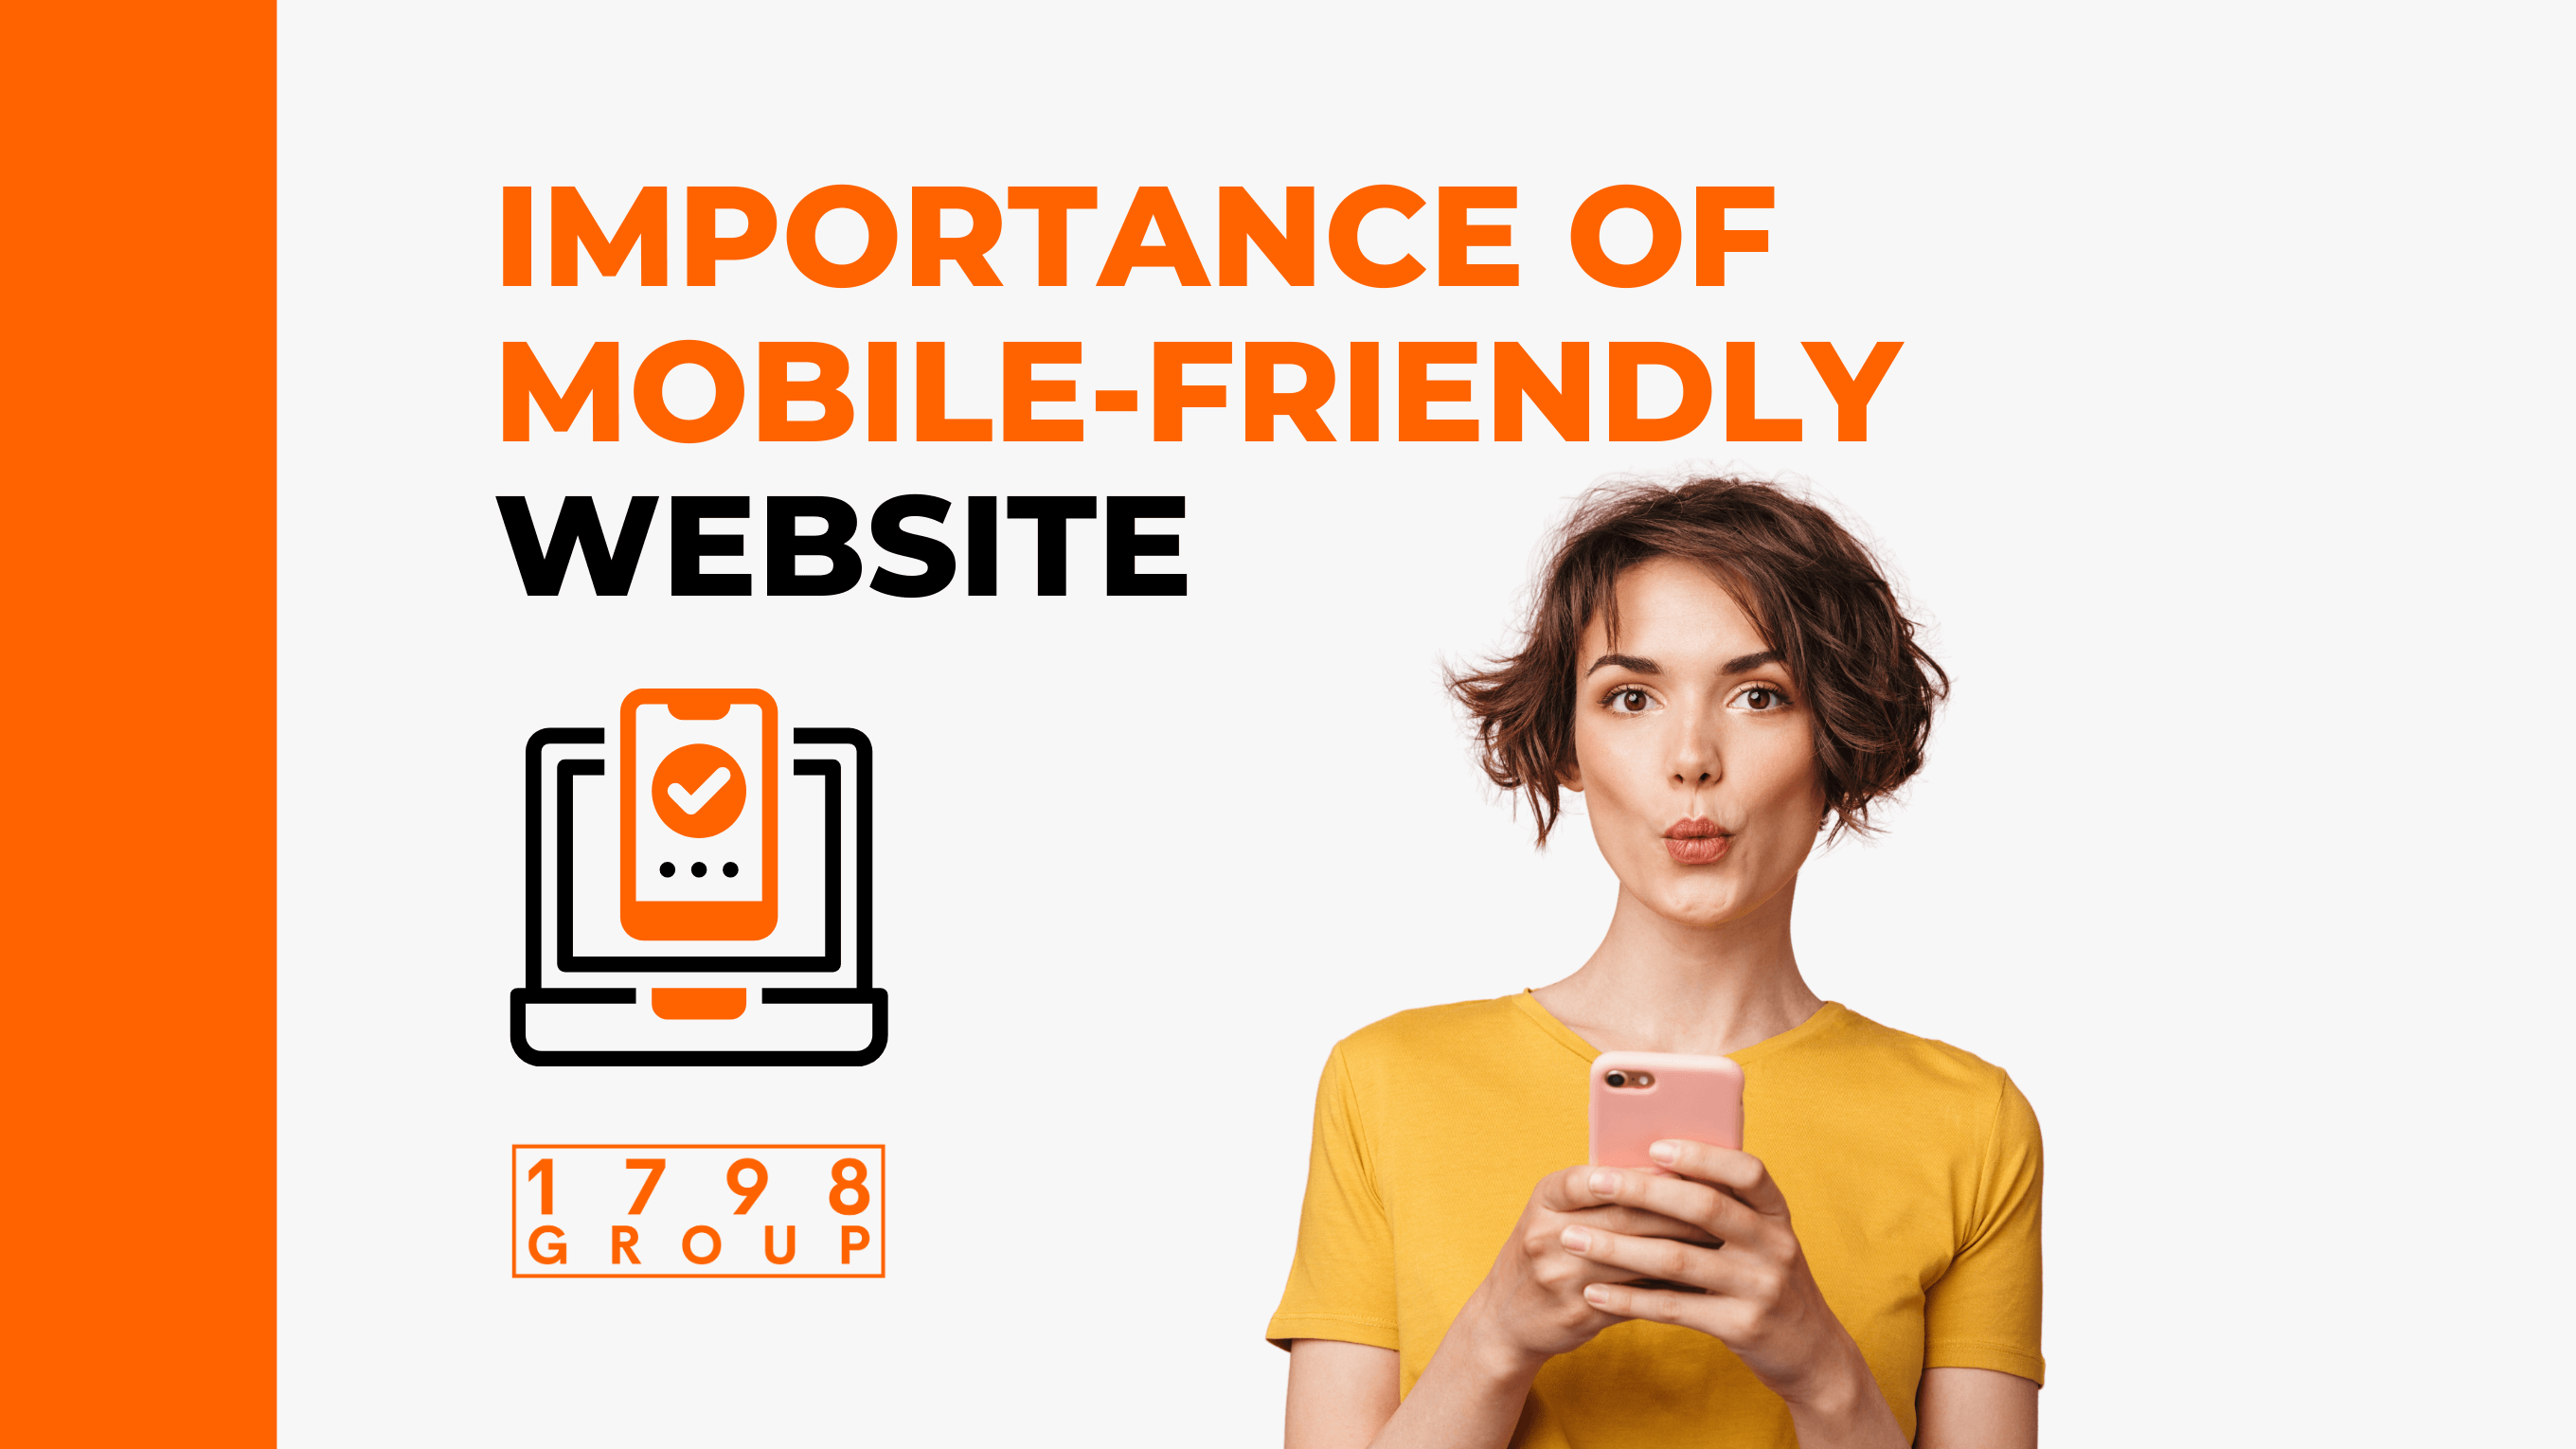 Importance of Mobile-Friendly Website